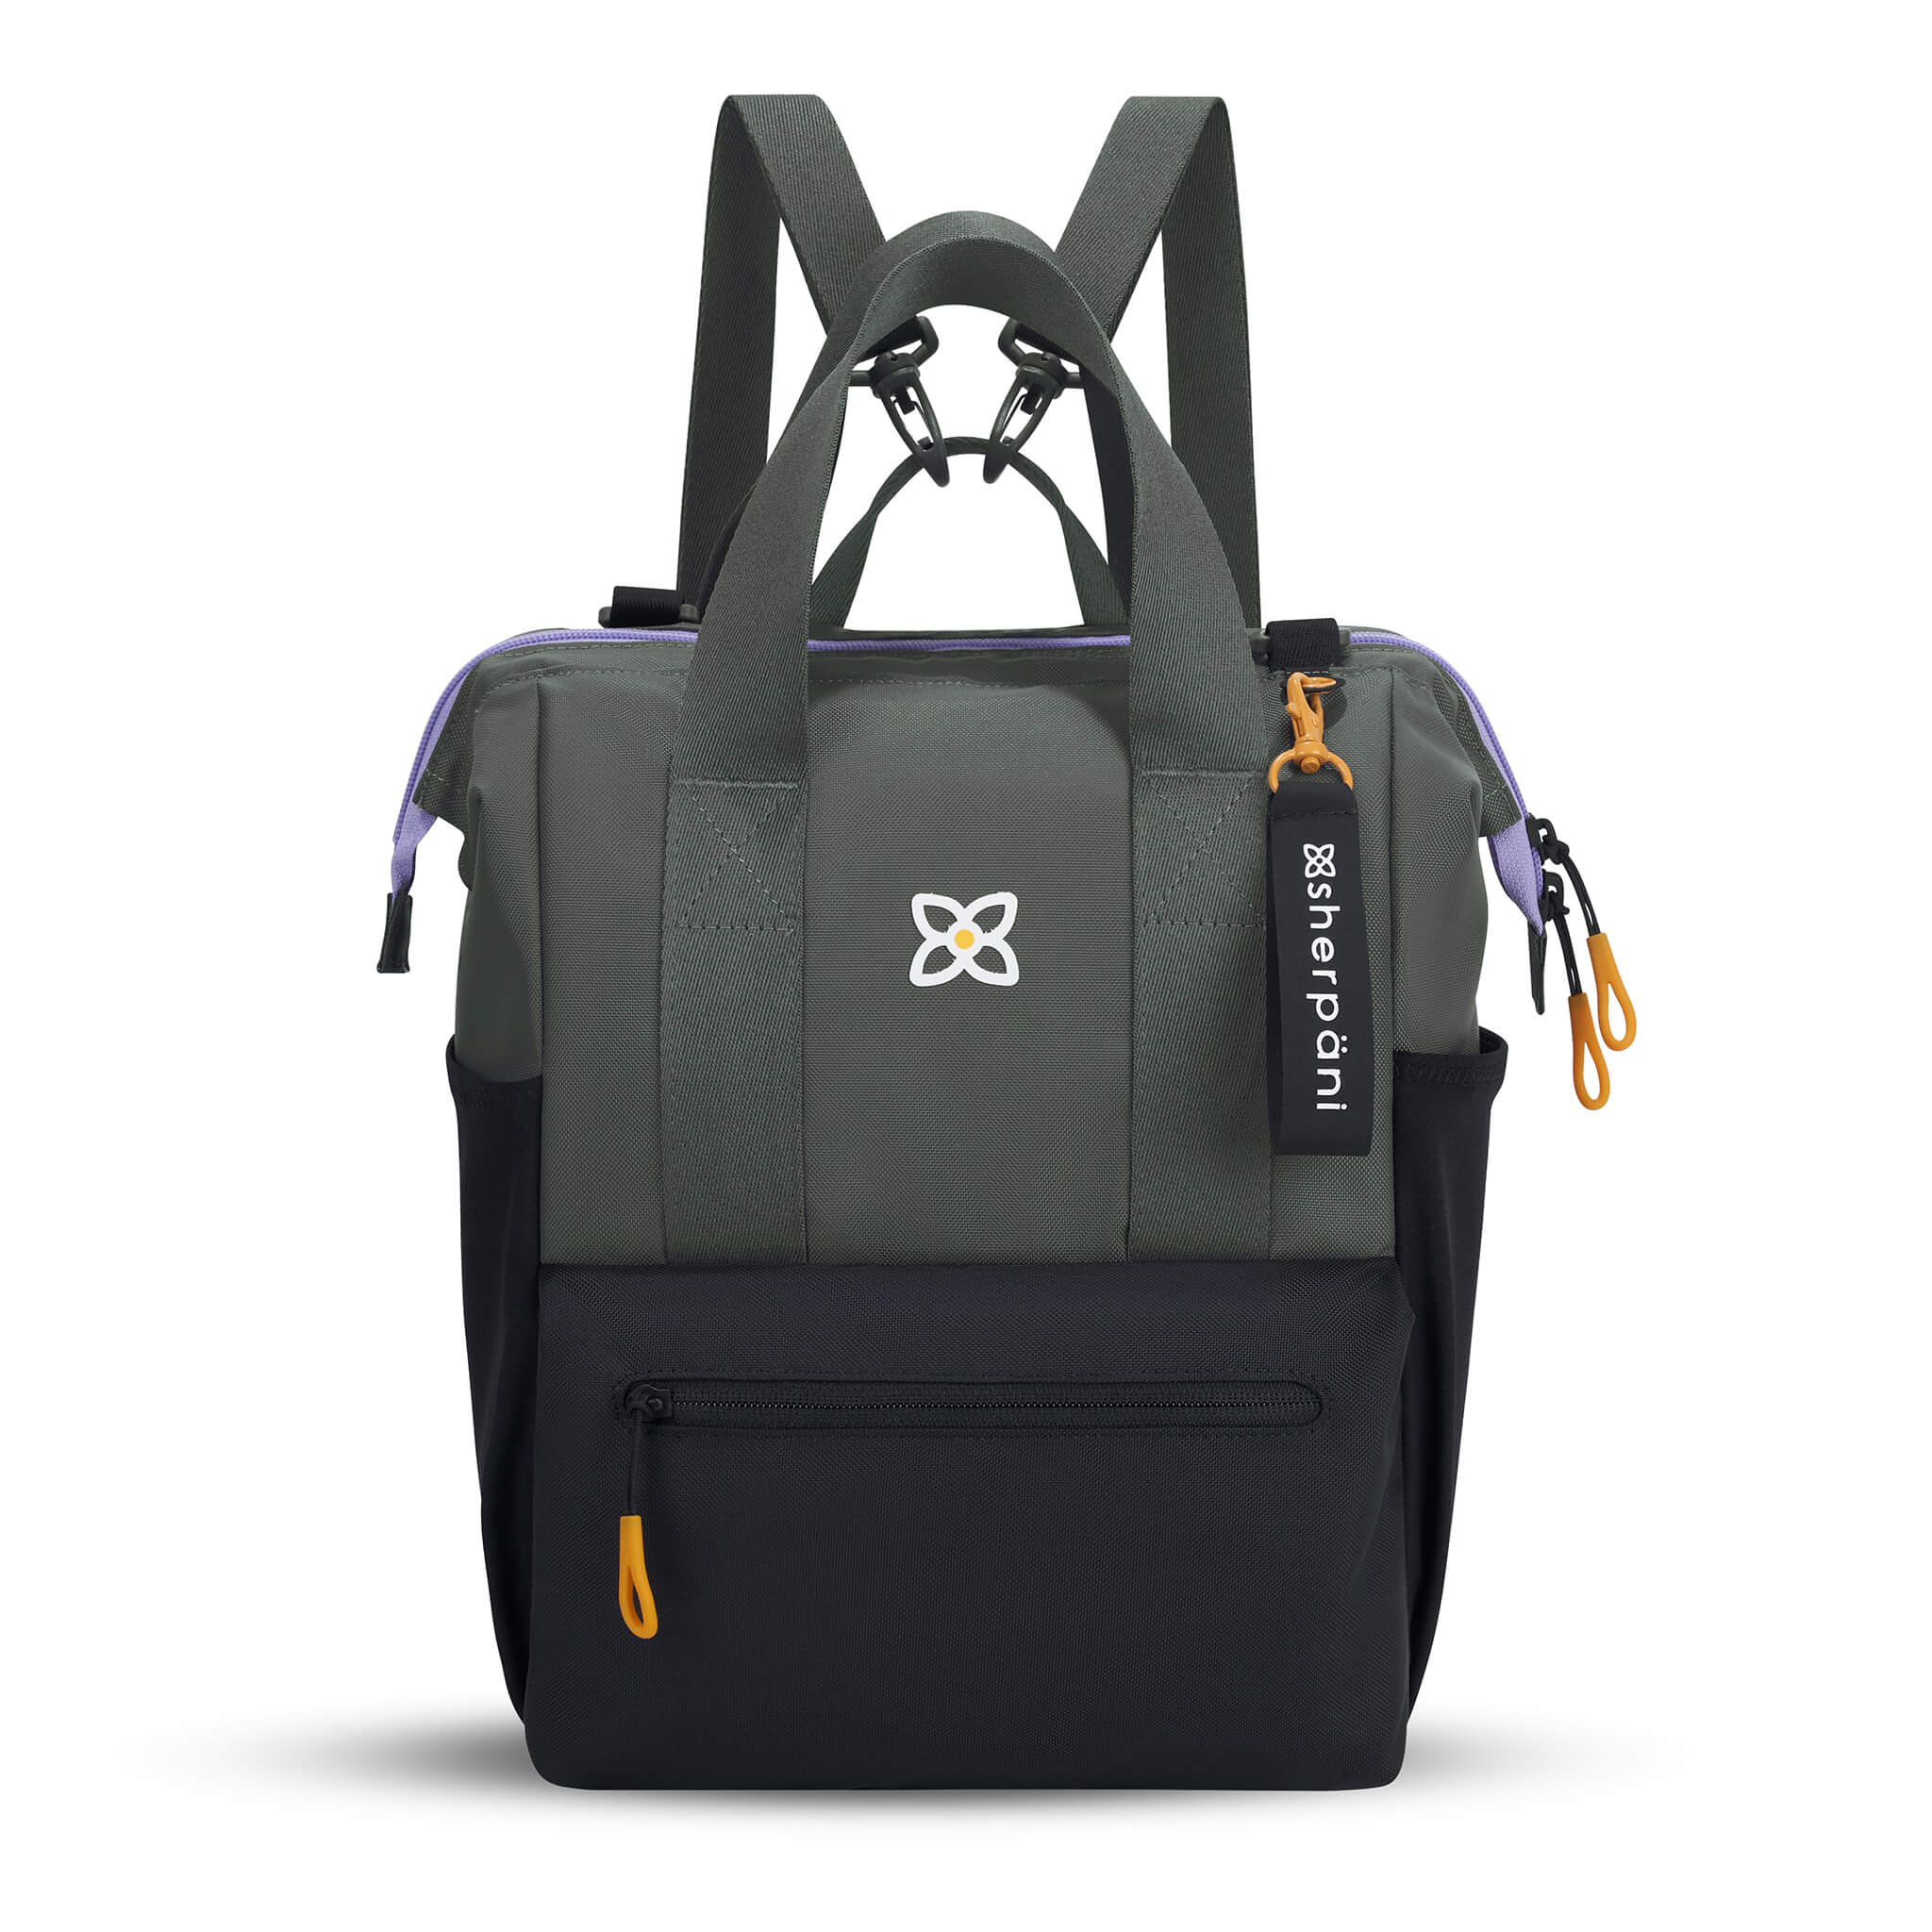 Flat front view of Sherpani convertible travel bag, the Dispatch in Juniper. Dispatch features include external zipper pocket, three water bottle holders, fixed tote handles, removable straps, detachable straps, adjustable straps, padded laptop sleeve and a doctor bag opening. The Juniper color is two-toned in black and gray with accents in yellow and lilac. 